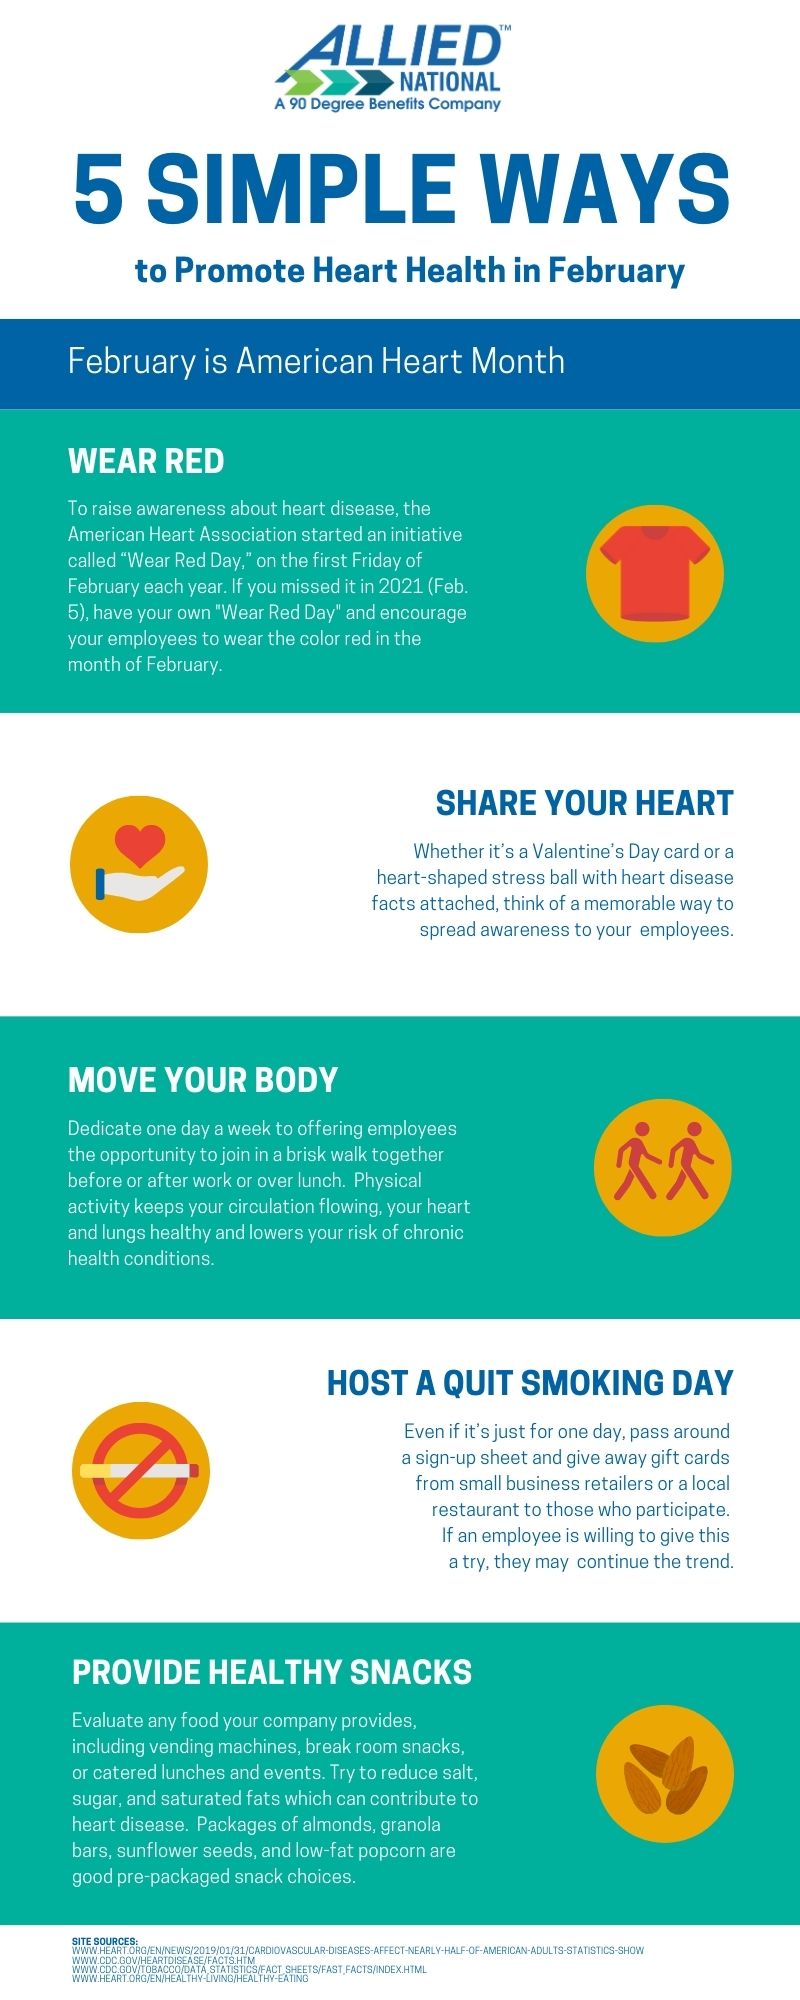 Heart health promotion resources